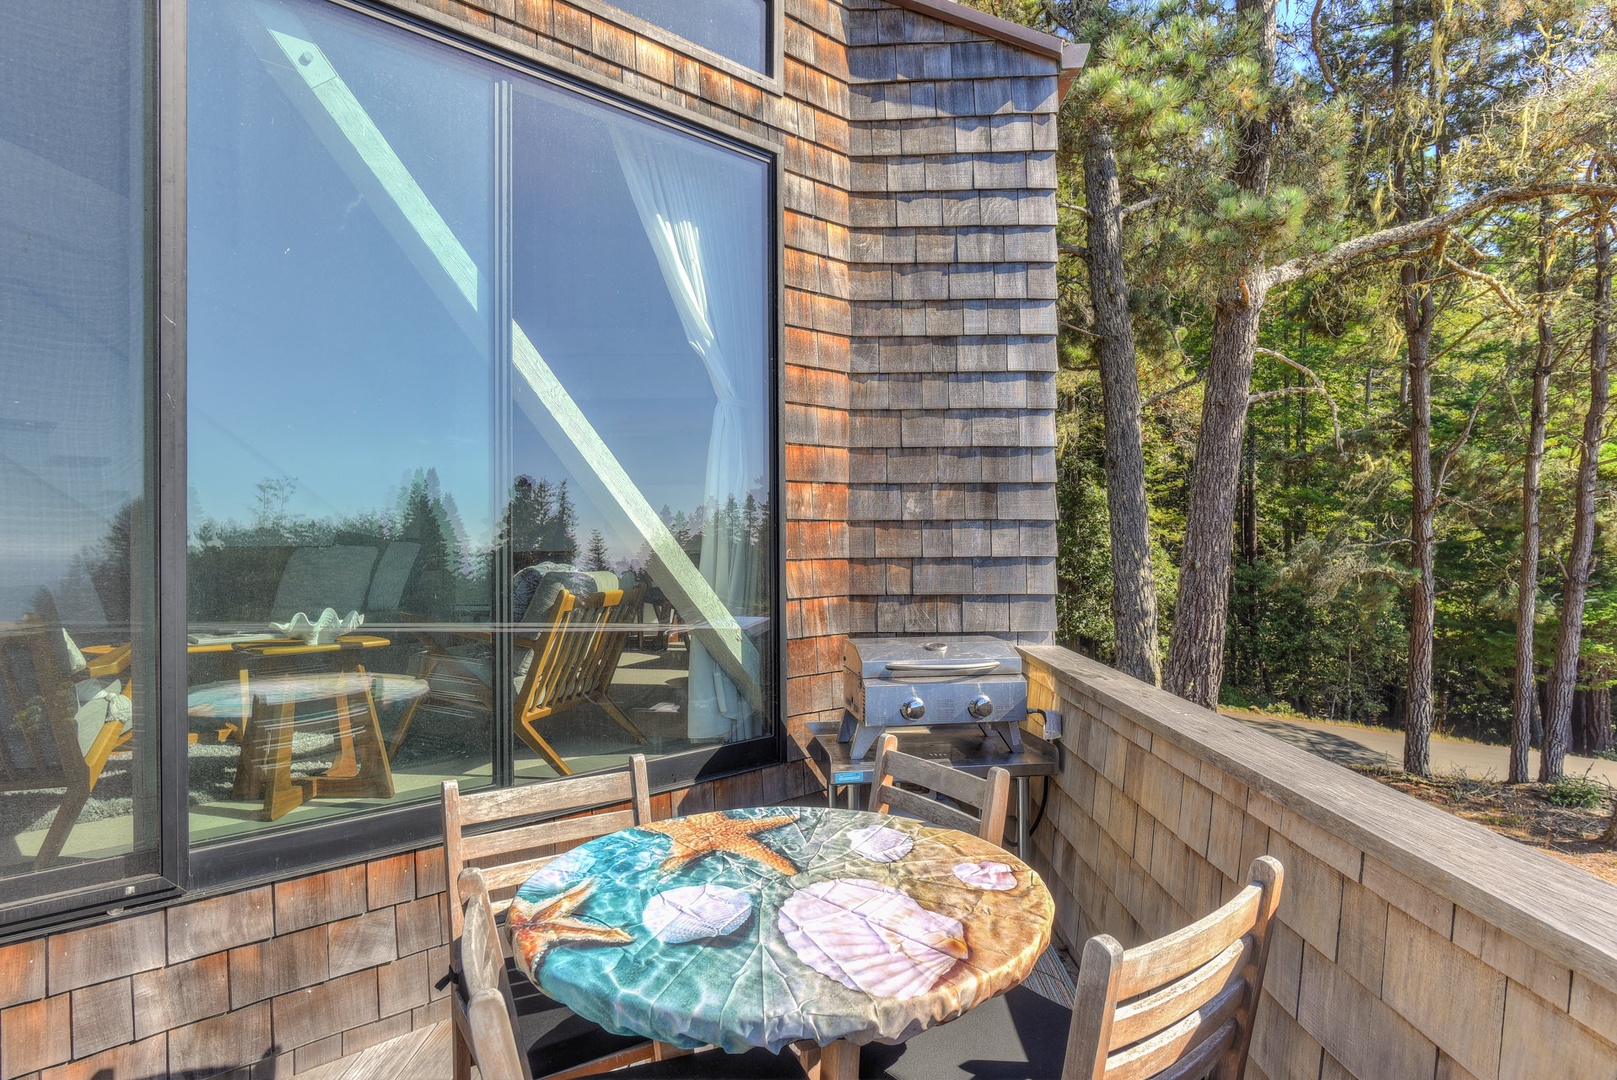 Back deck with outdoor seating, BBQ, and ocean view